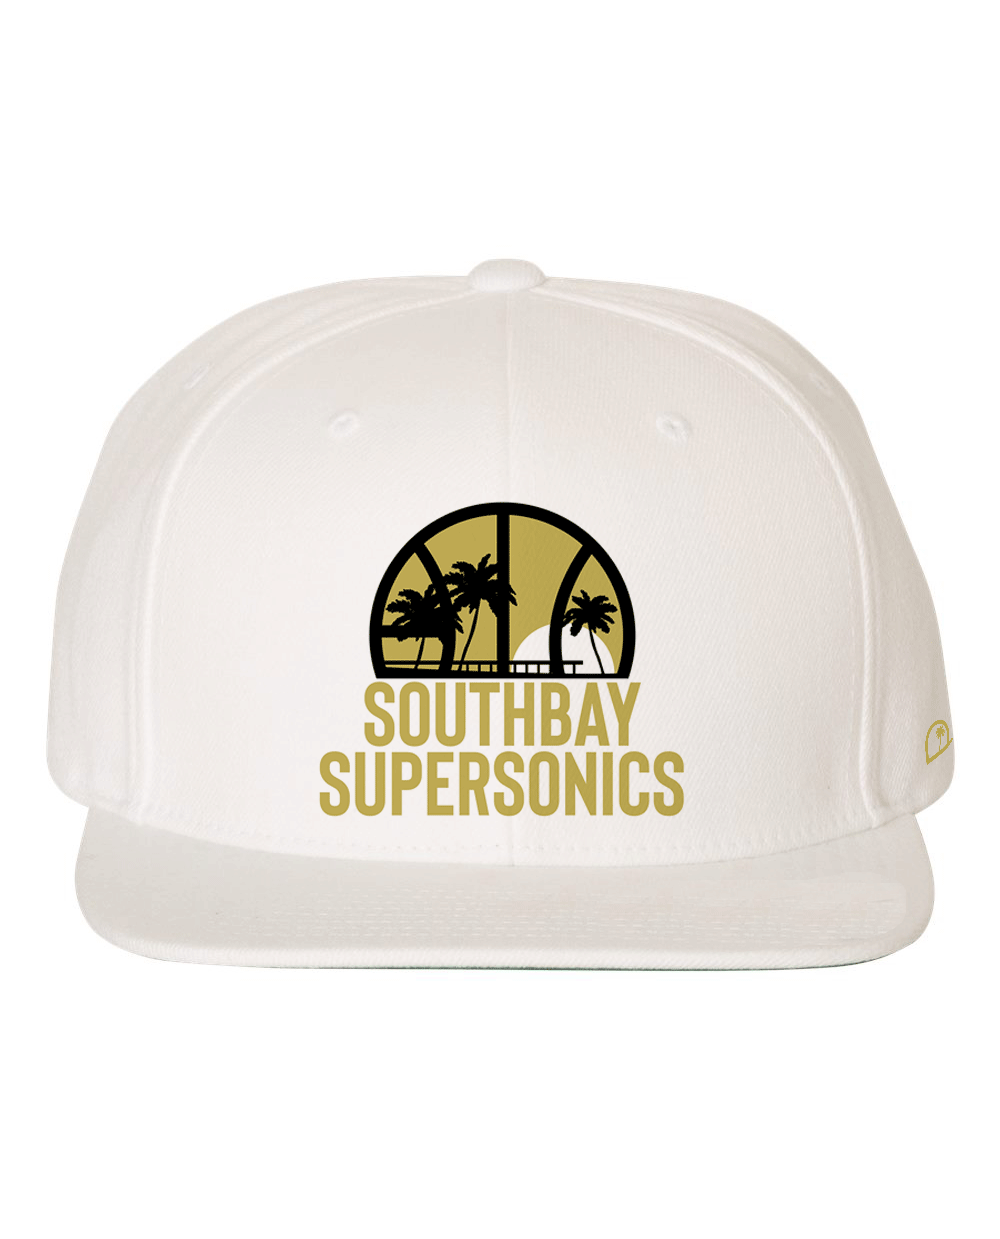 SOUTHBAY SUPERSONICS